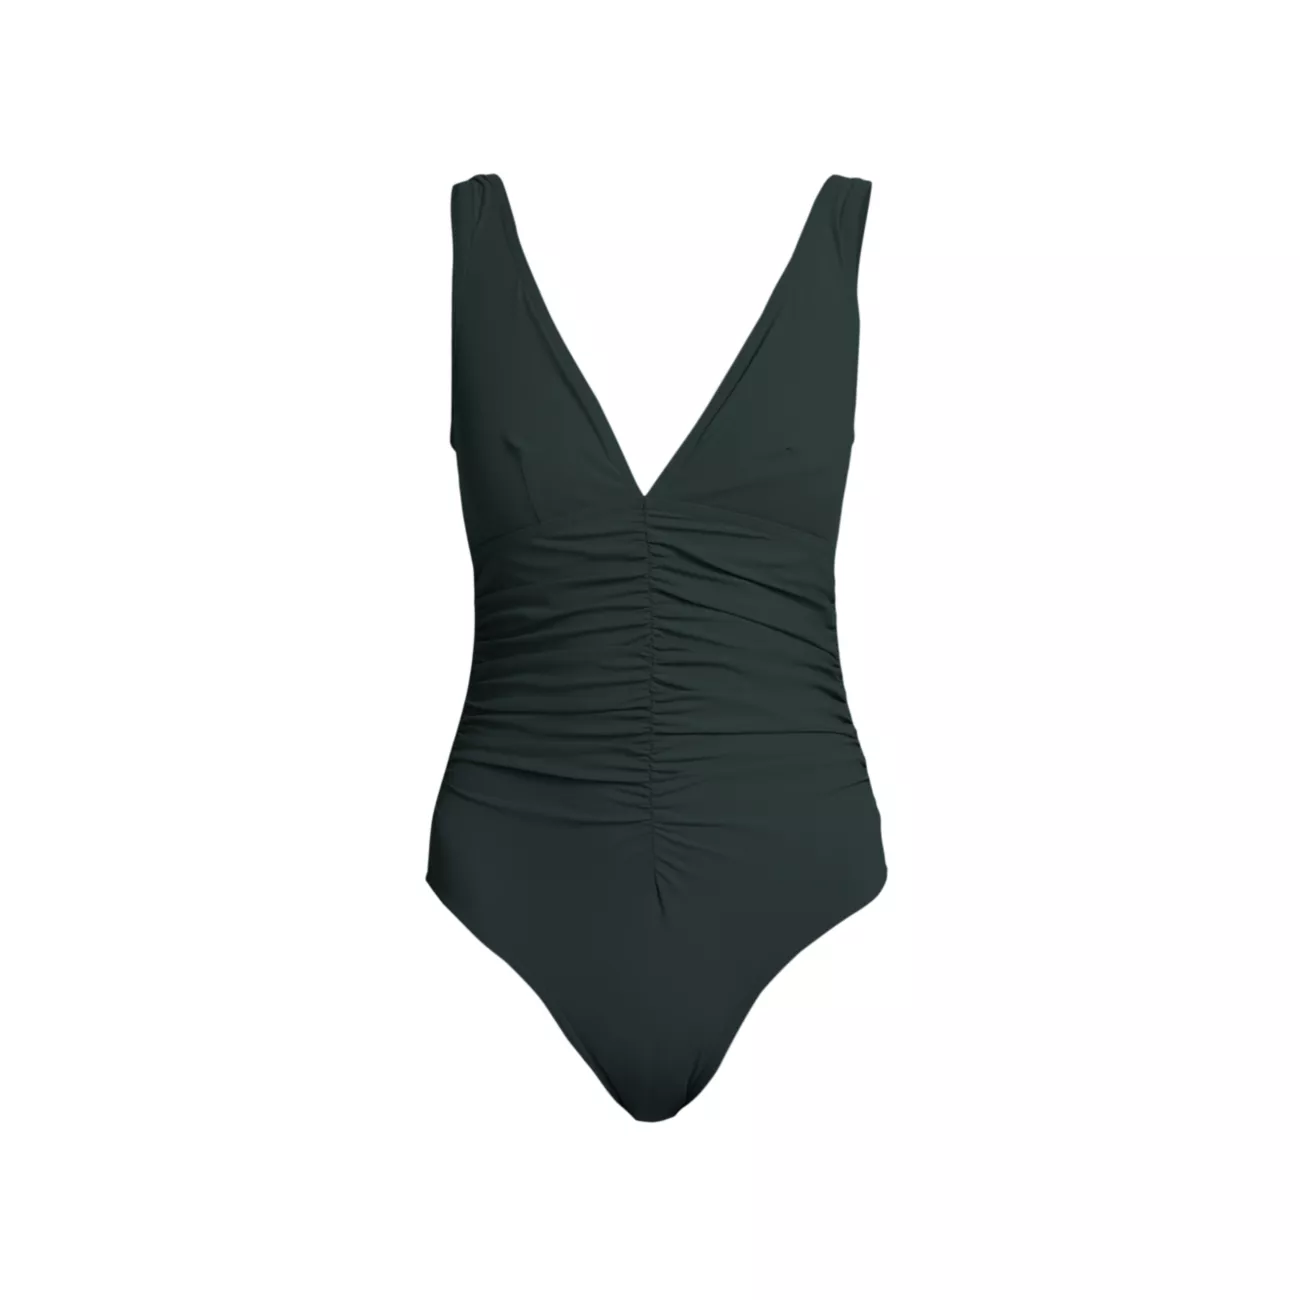 One-Piece Ruched-Center Swimsuit Karla Colletto Swim